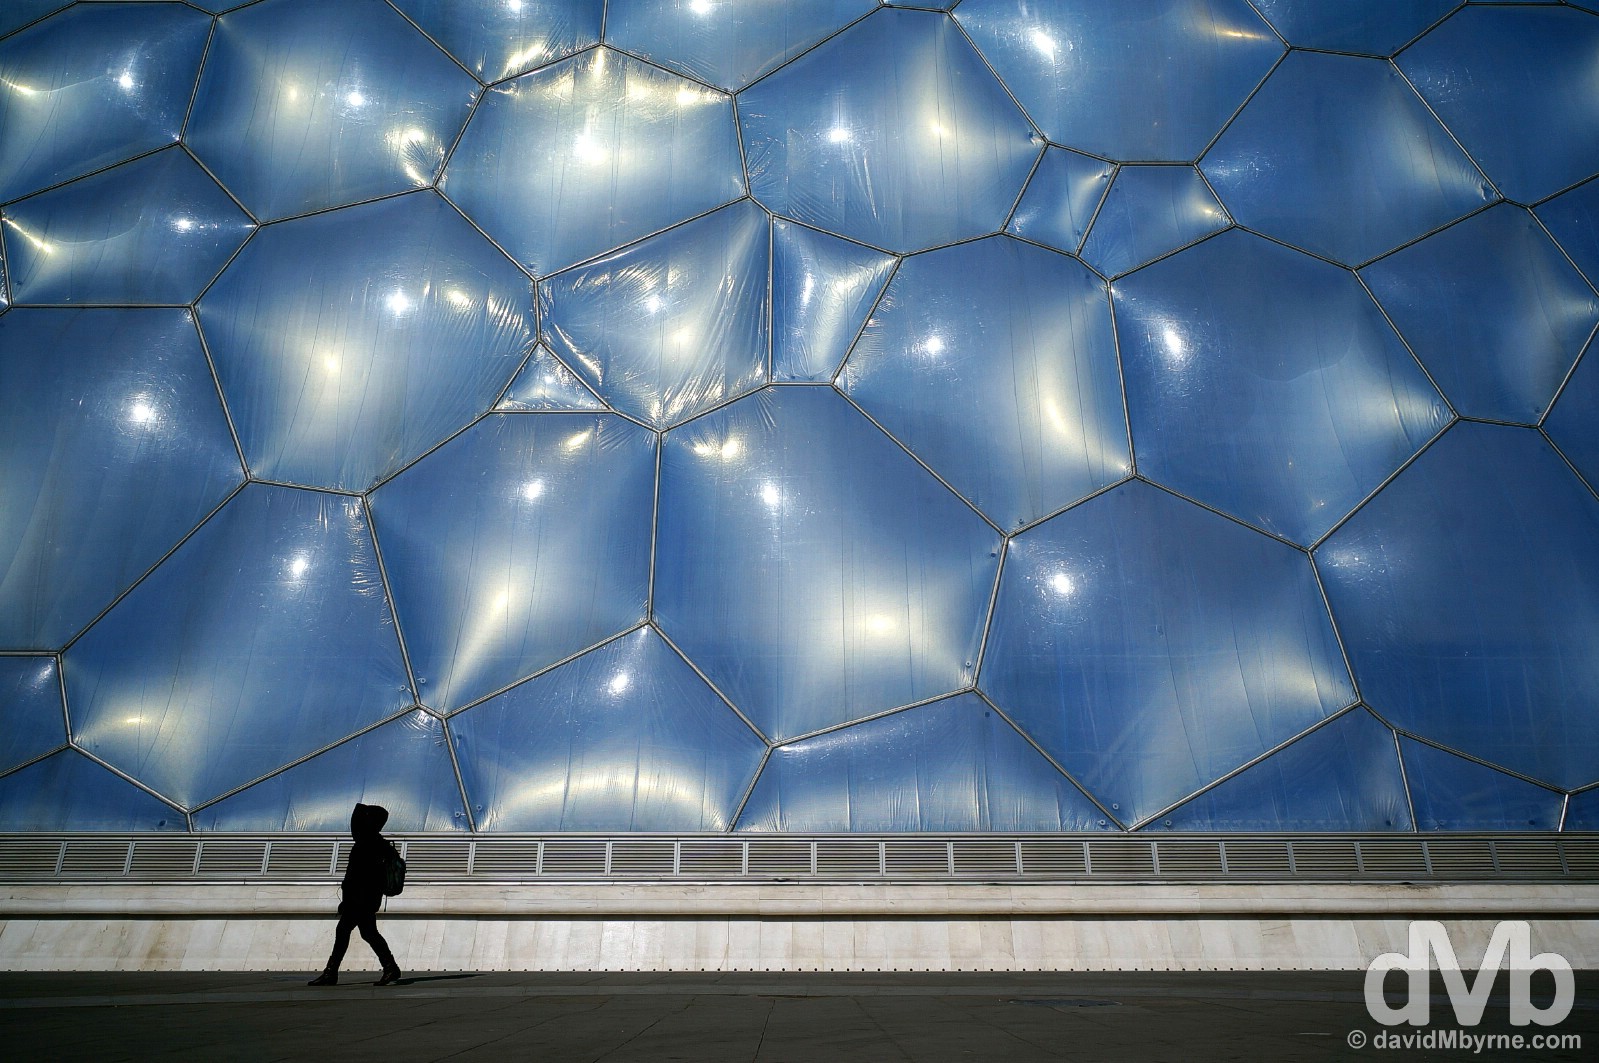 Walking past the National Aquatic Centre, a.k.a. the Water Cube, in Beijing Olympic Park, Beijing, China. February 5, 2015.